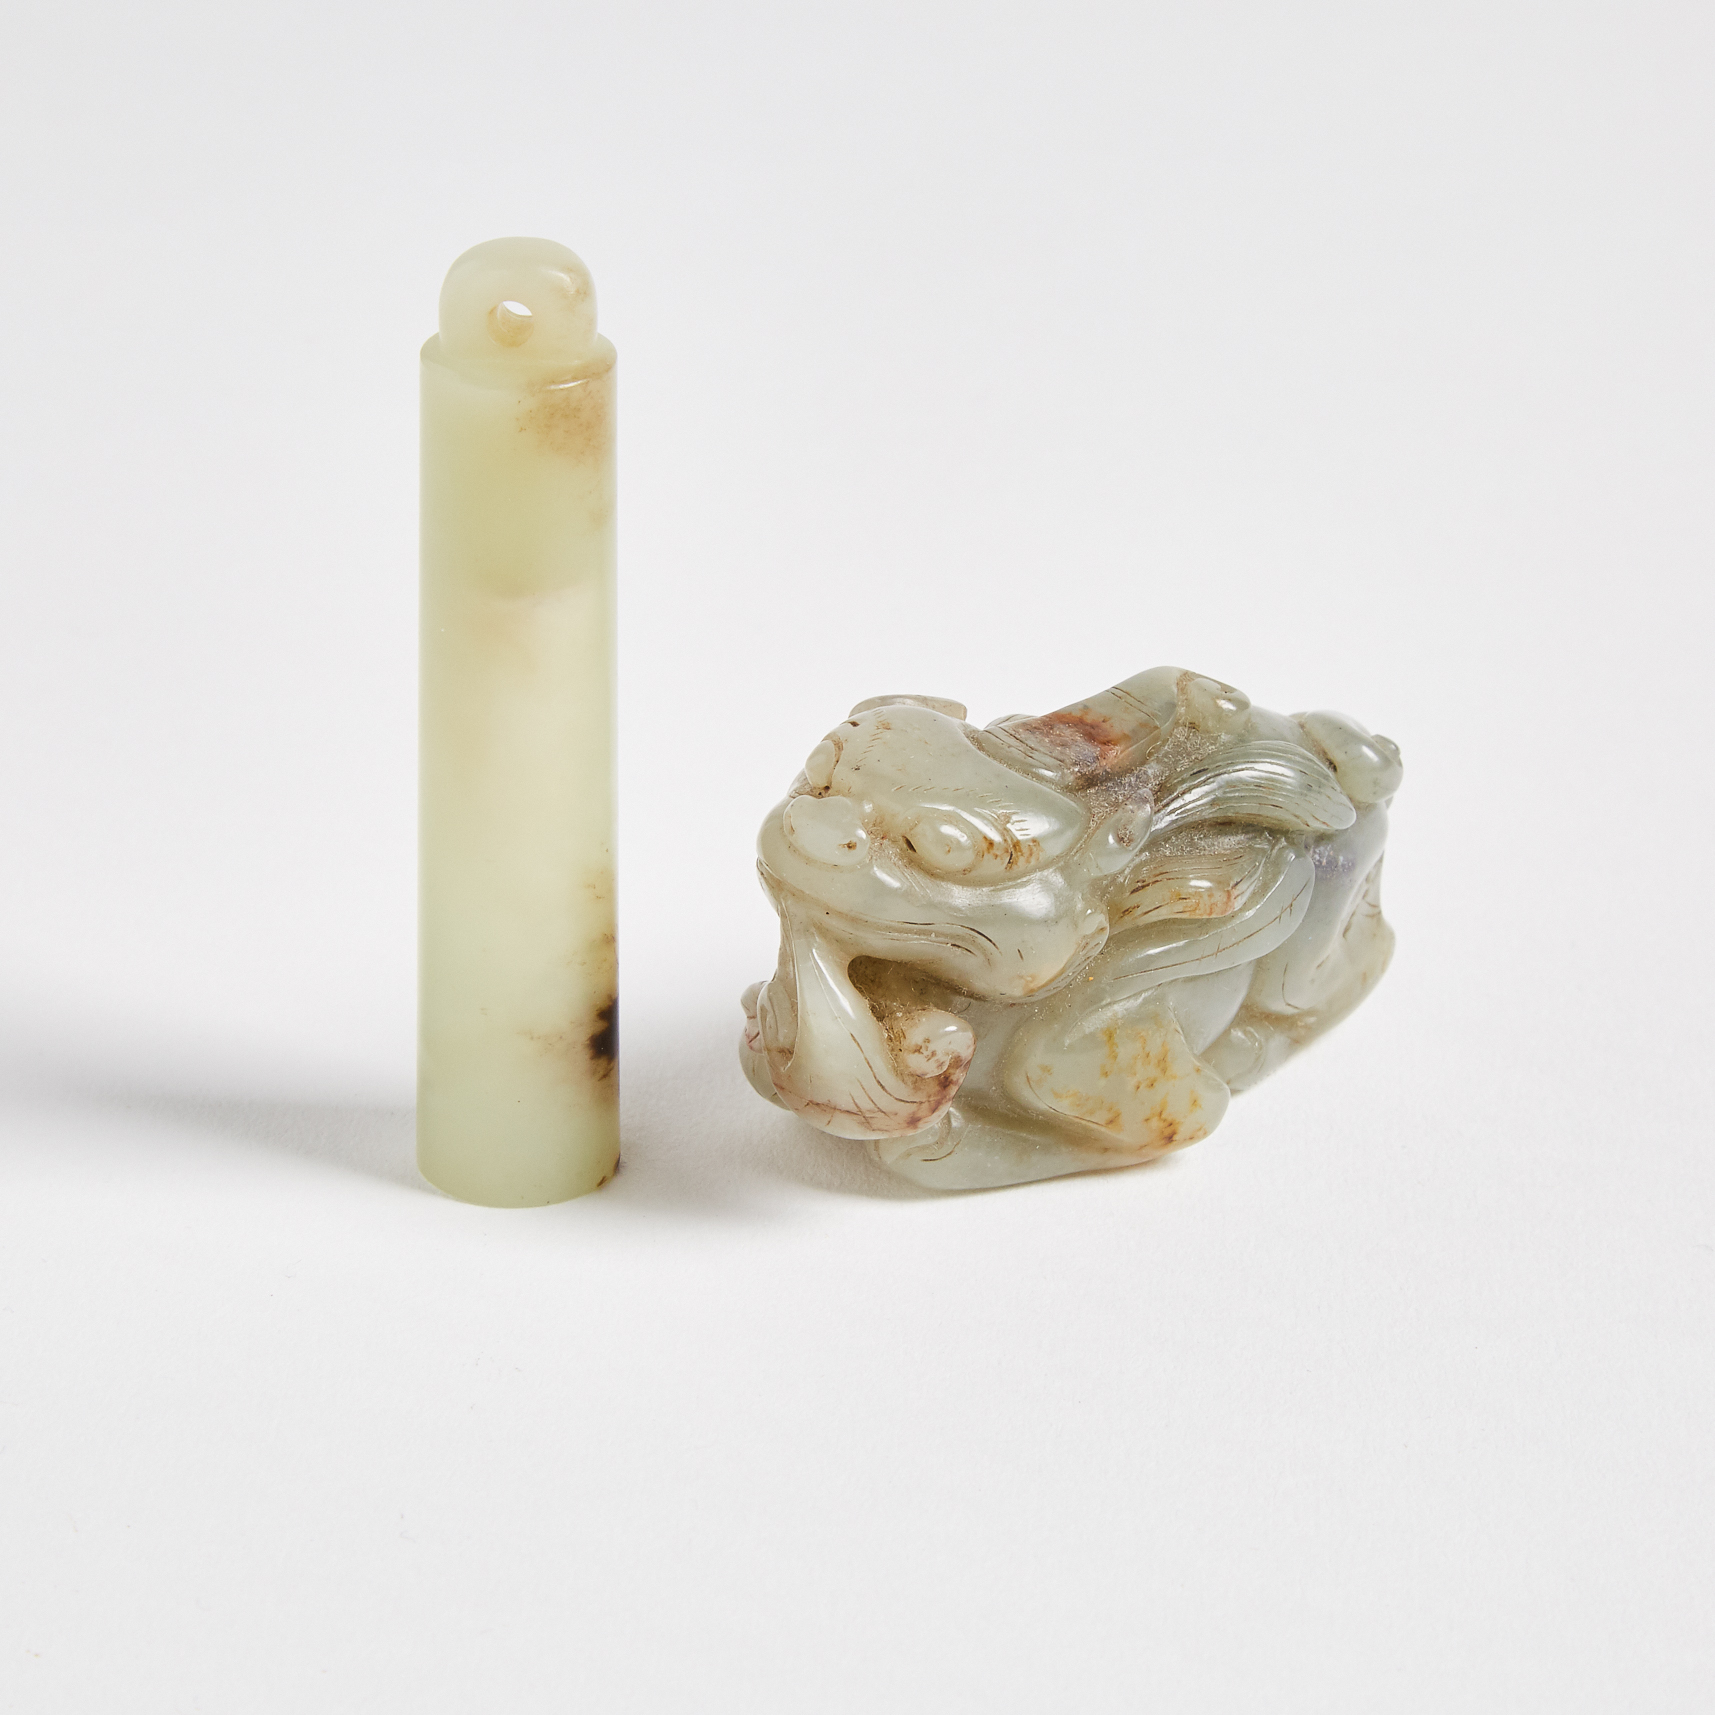 A Celadon and Russet Jade Official's Hat Tube and a Carved Beast